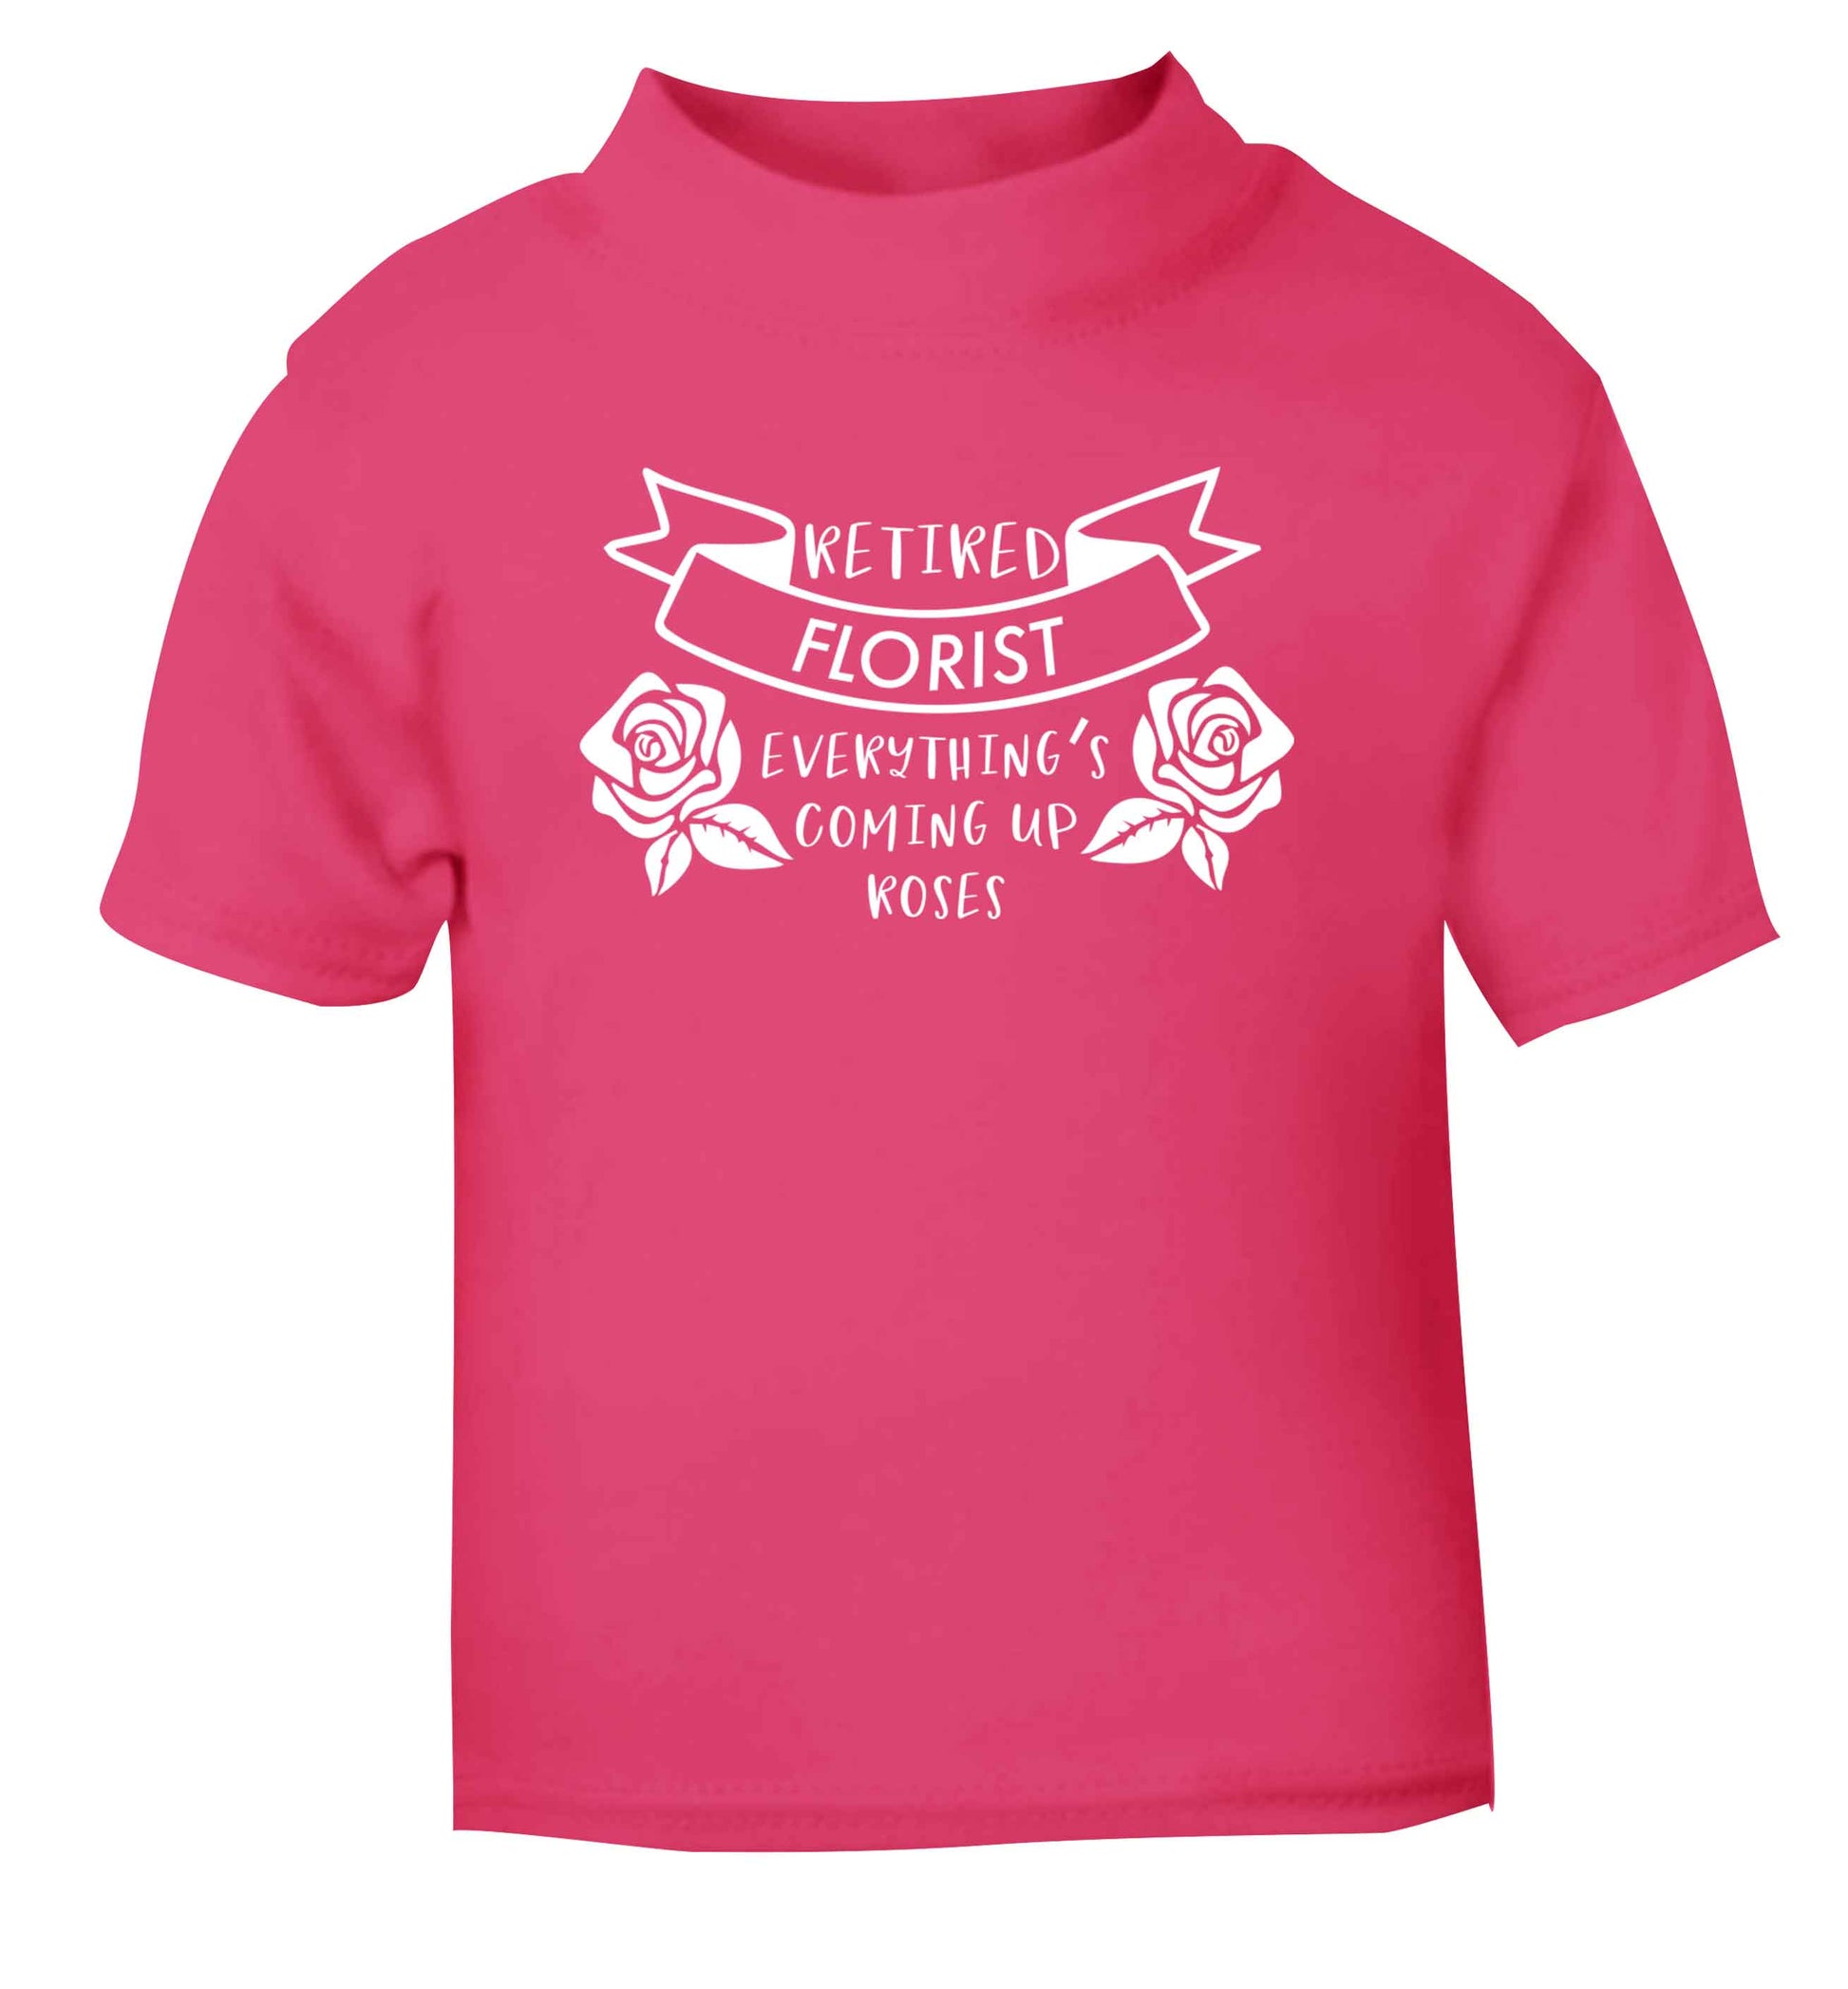 Retired florist everything's coming up roses pink Baby Toddler Tshirt 2 Years